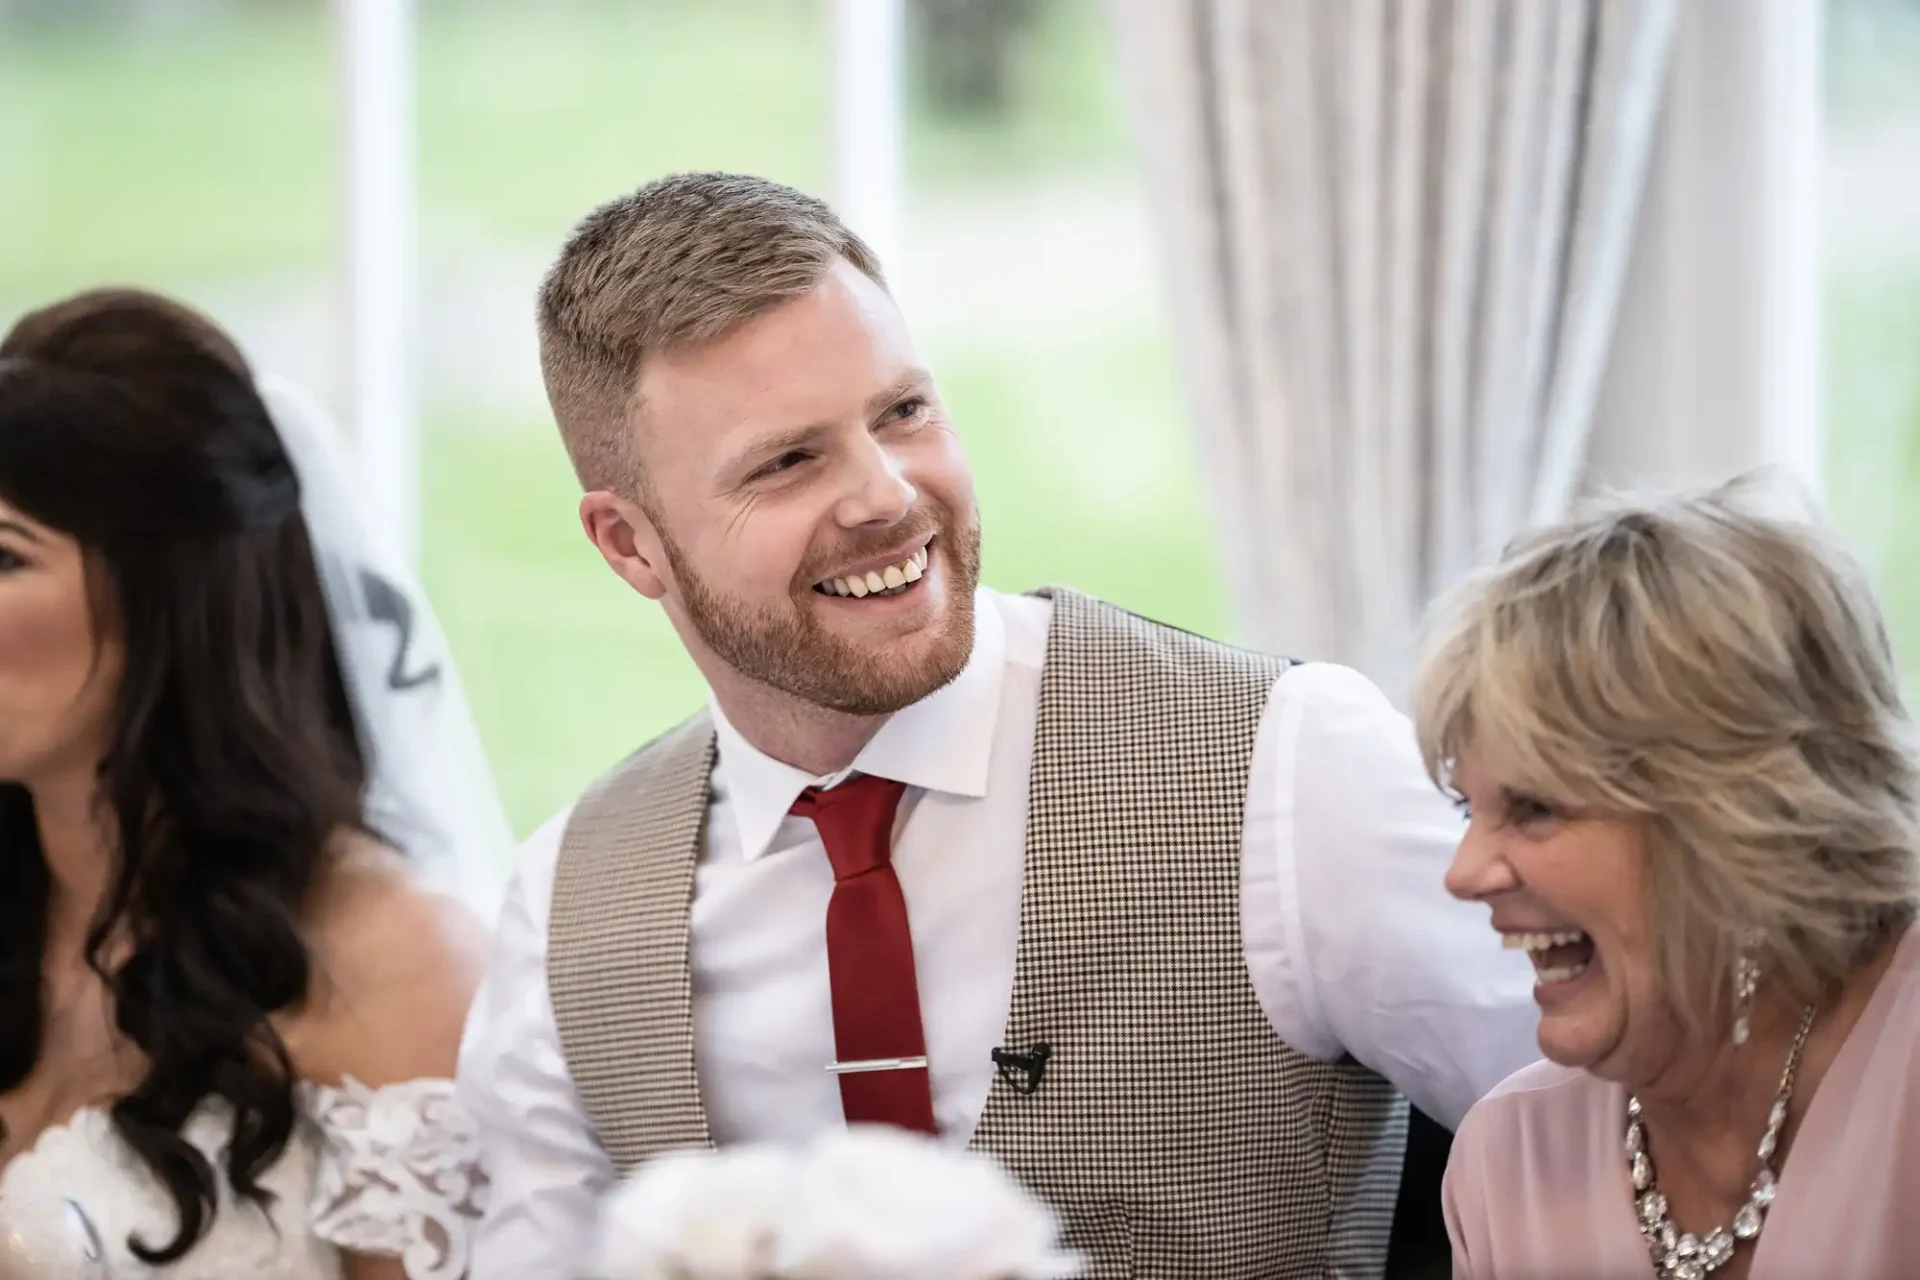 A man in a tweed vest and red tie smiles joyfully at a wedding, sitting beside a bride and an older woman who is laughing.